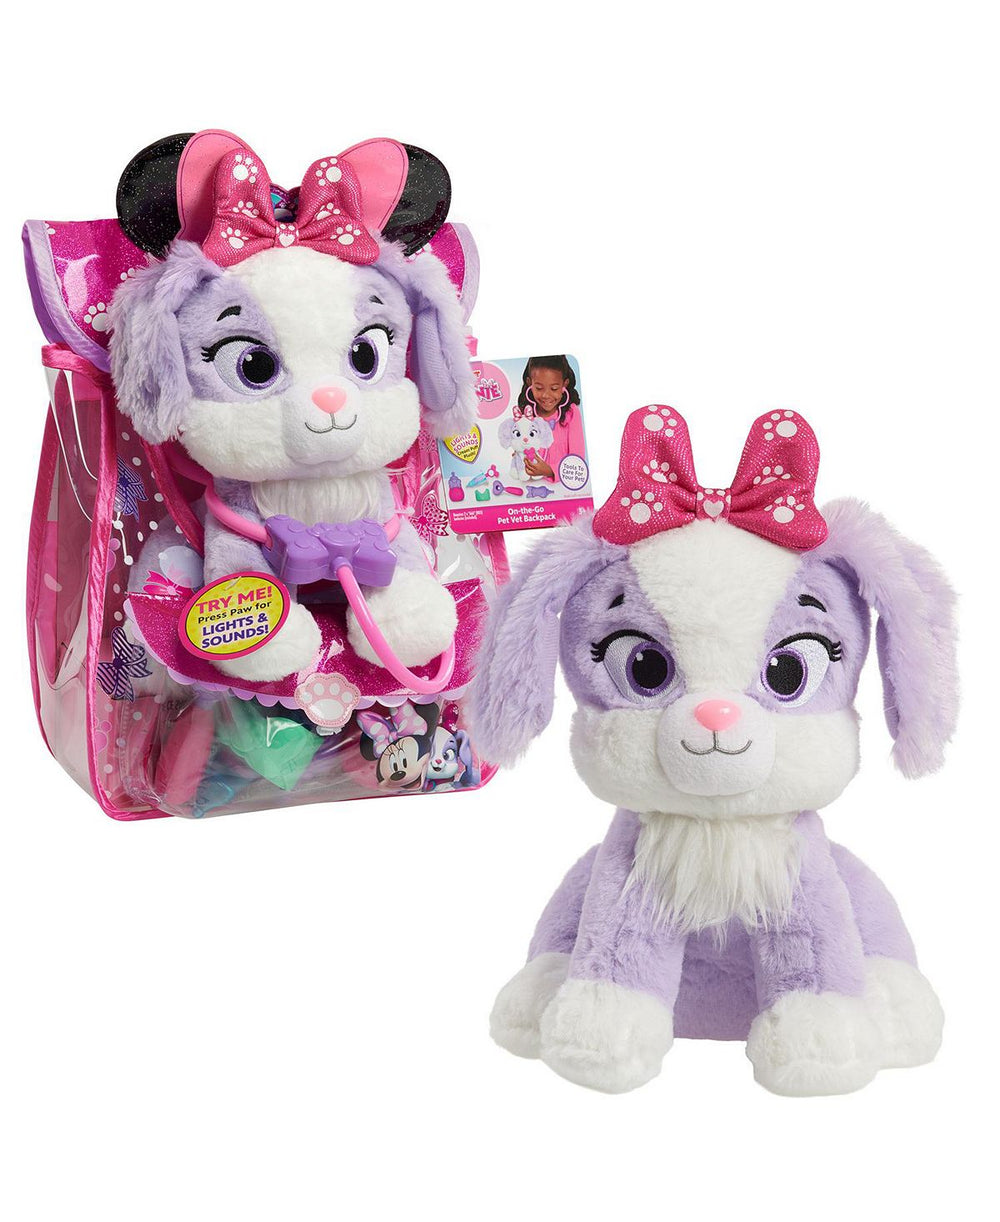 Disney Junior Minnie Mouse On-the-Go Pet Vet Backpack Set with Interactive Plush